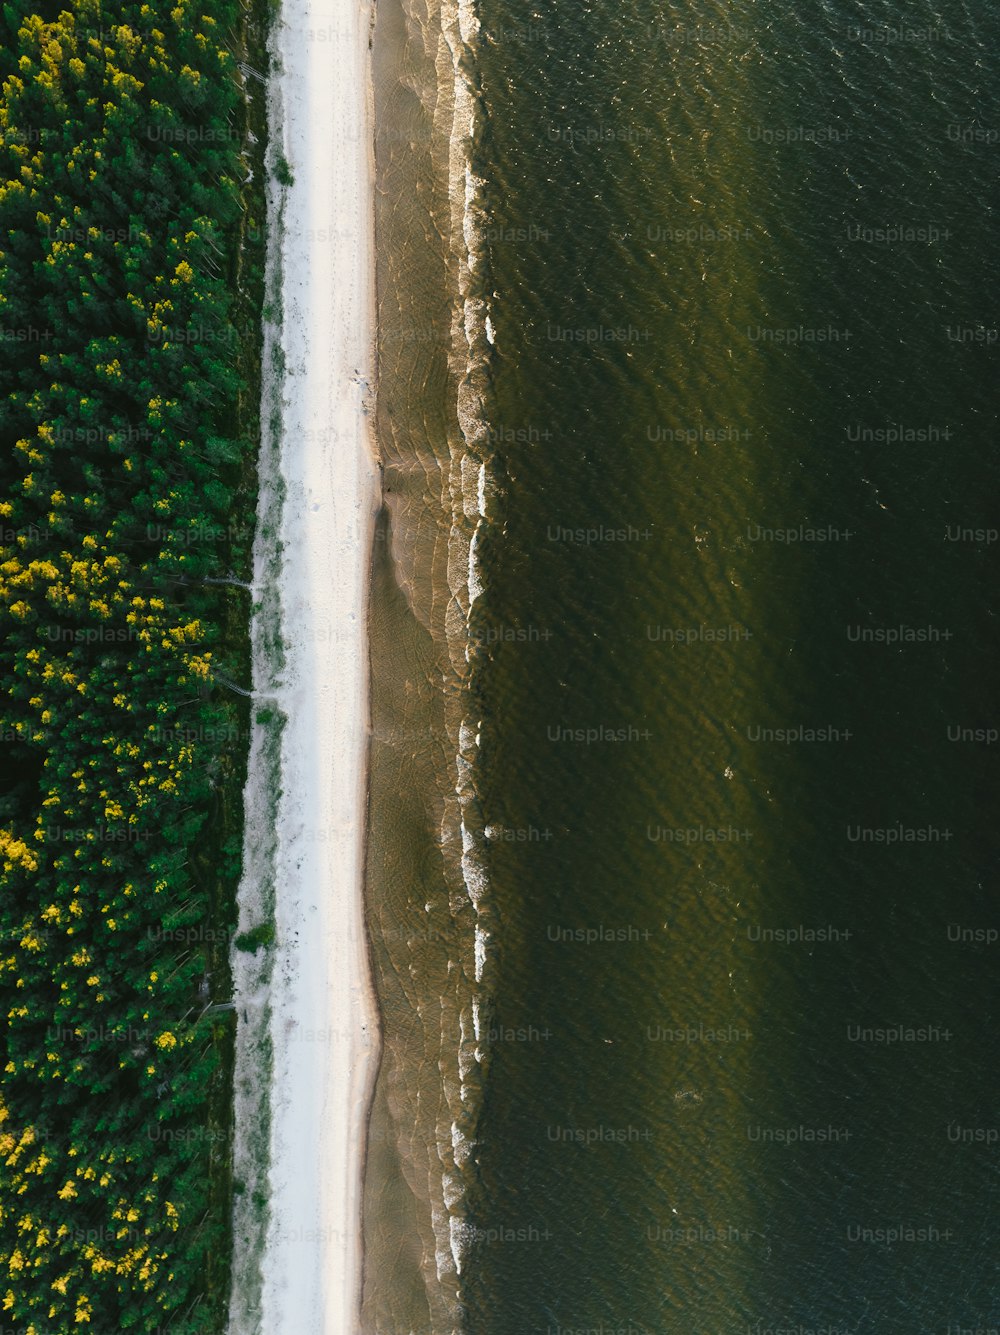 an aerial view of a beach and a body of water